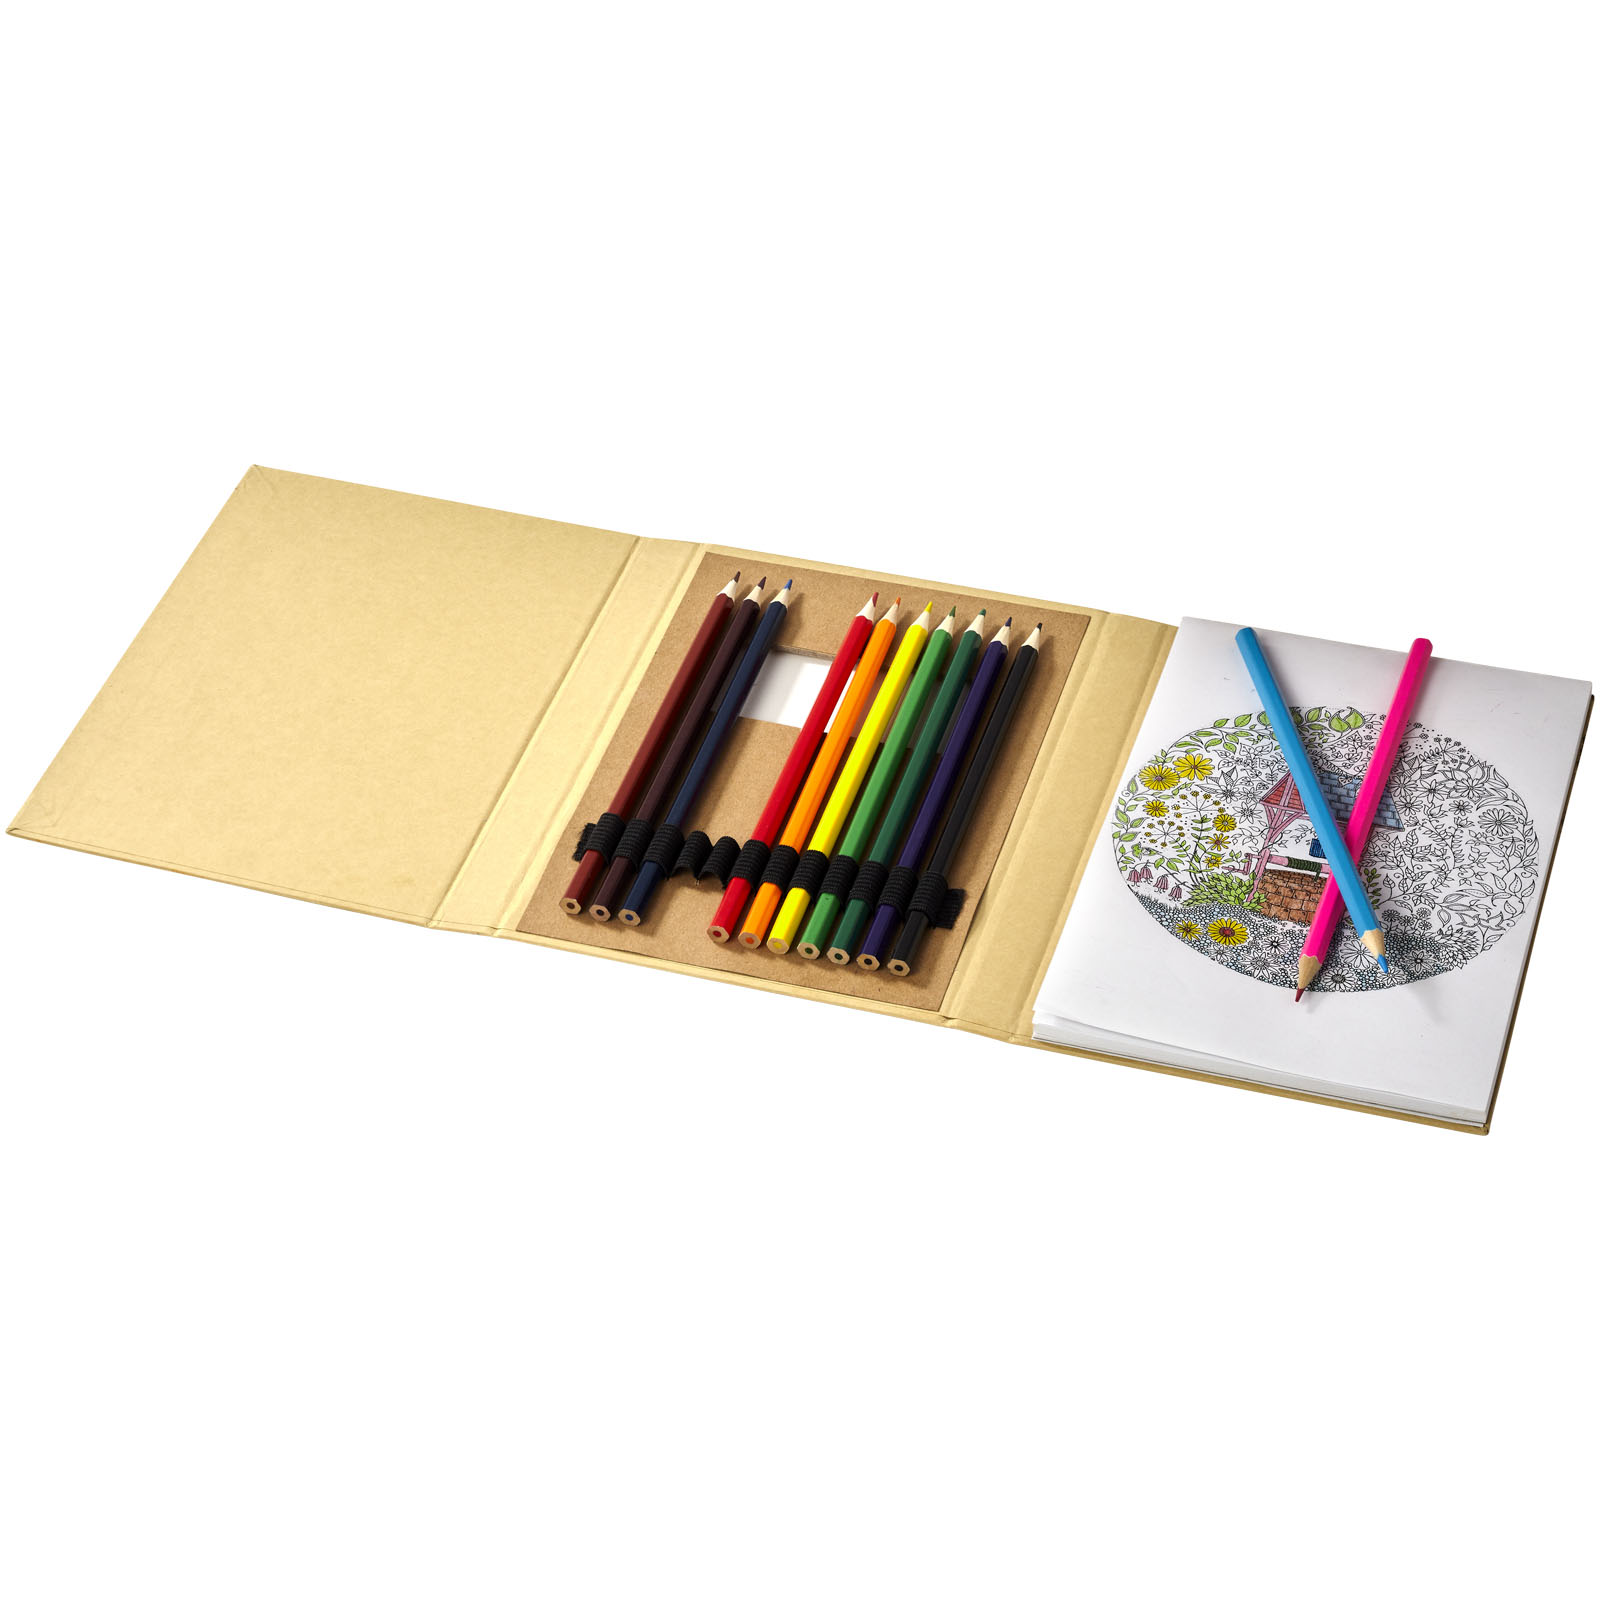 Advertising Colouring sets - Pablo colouring set with drawing paper - 2